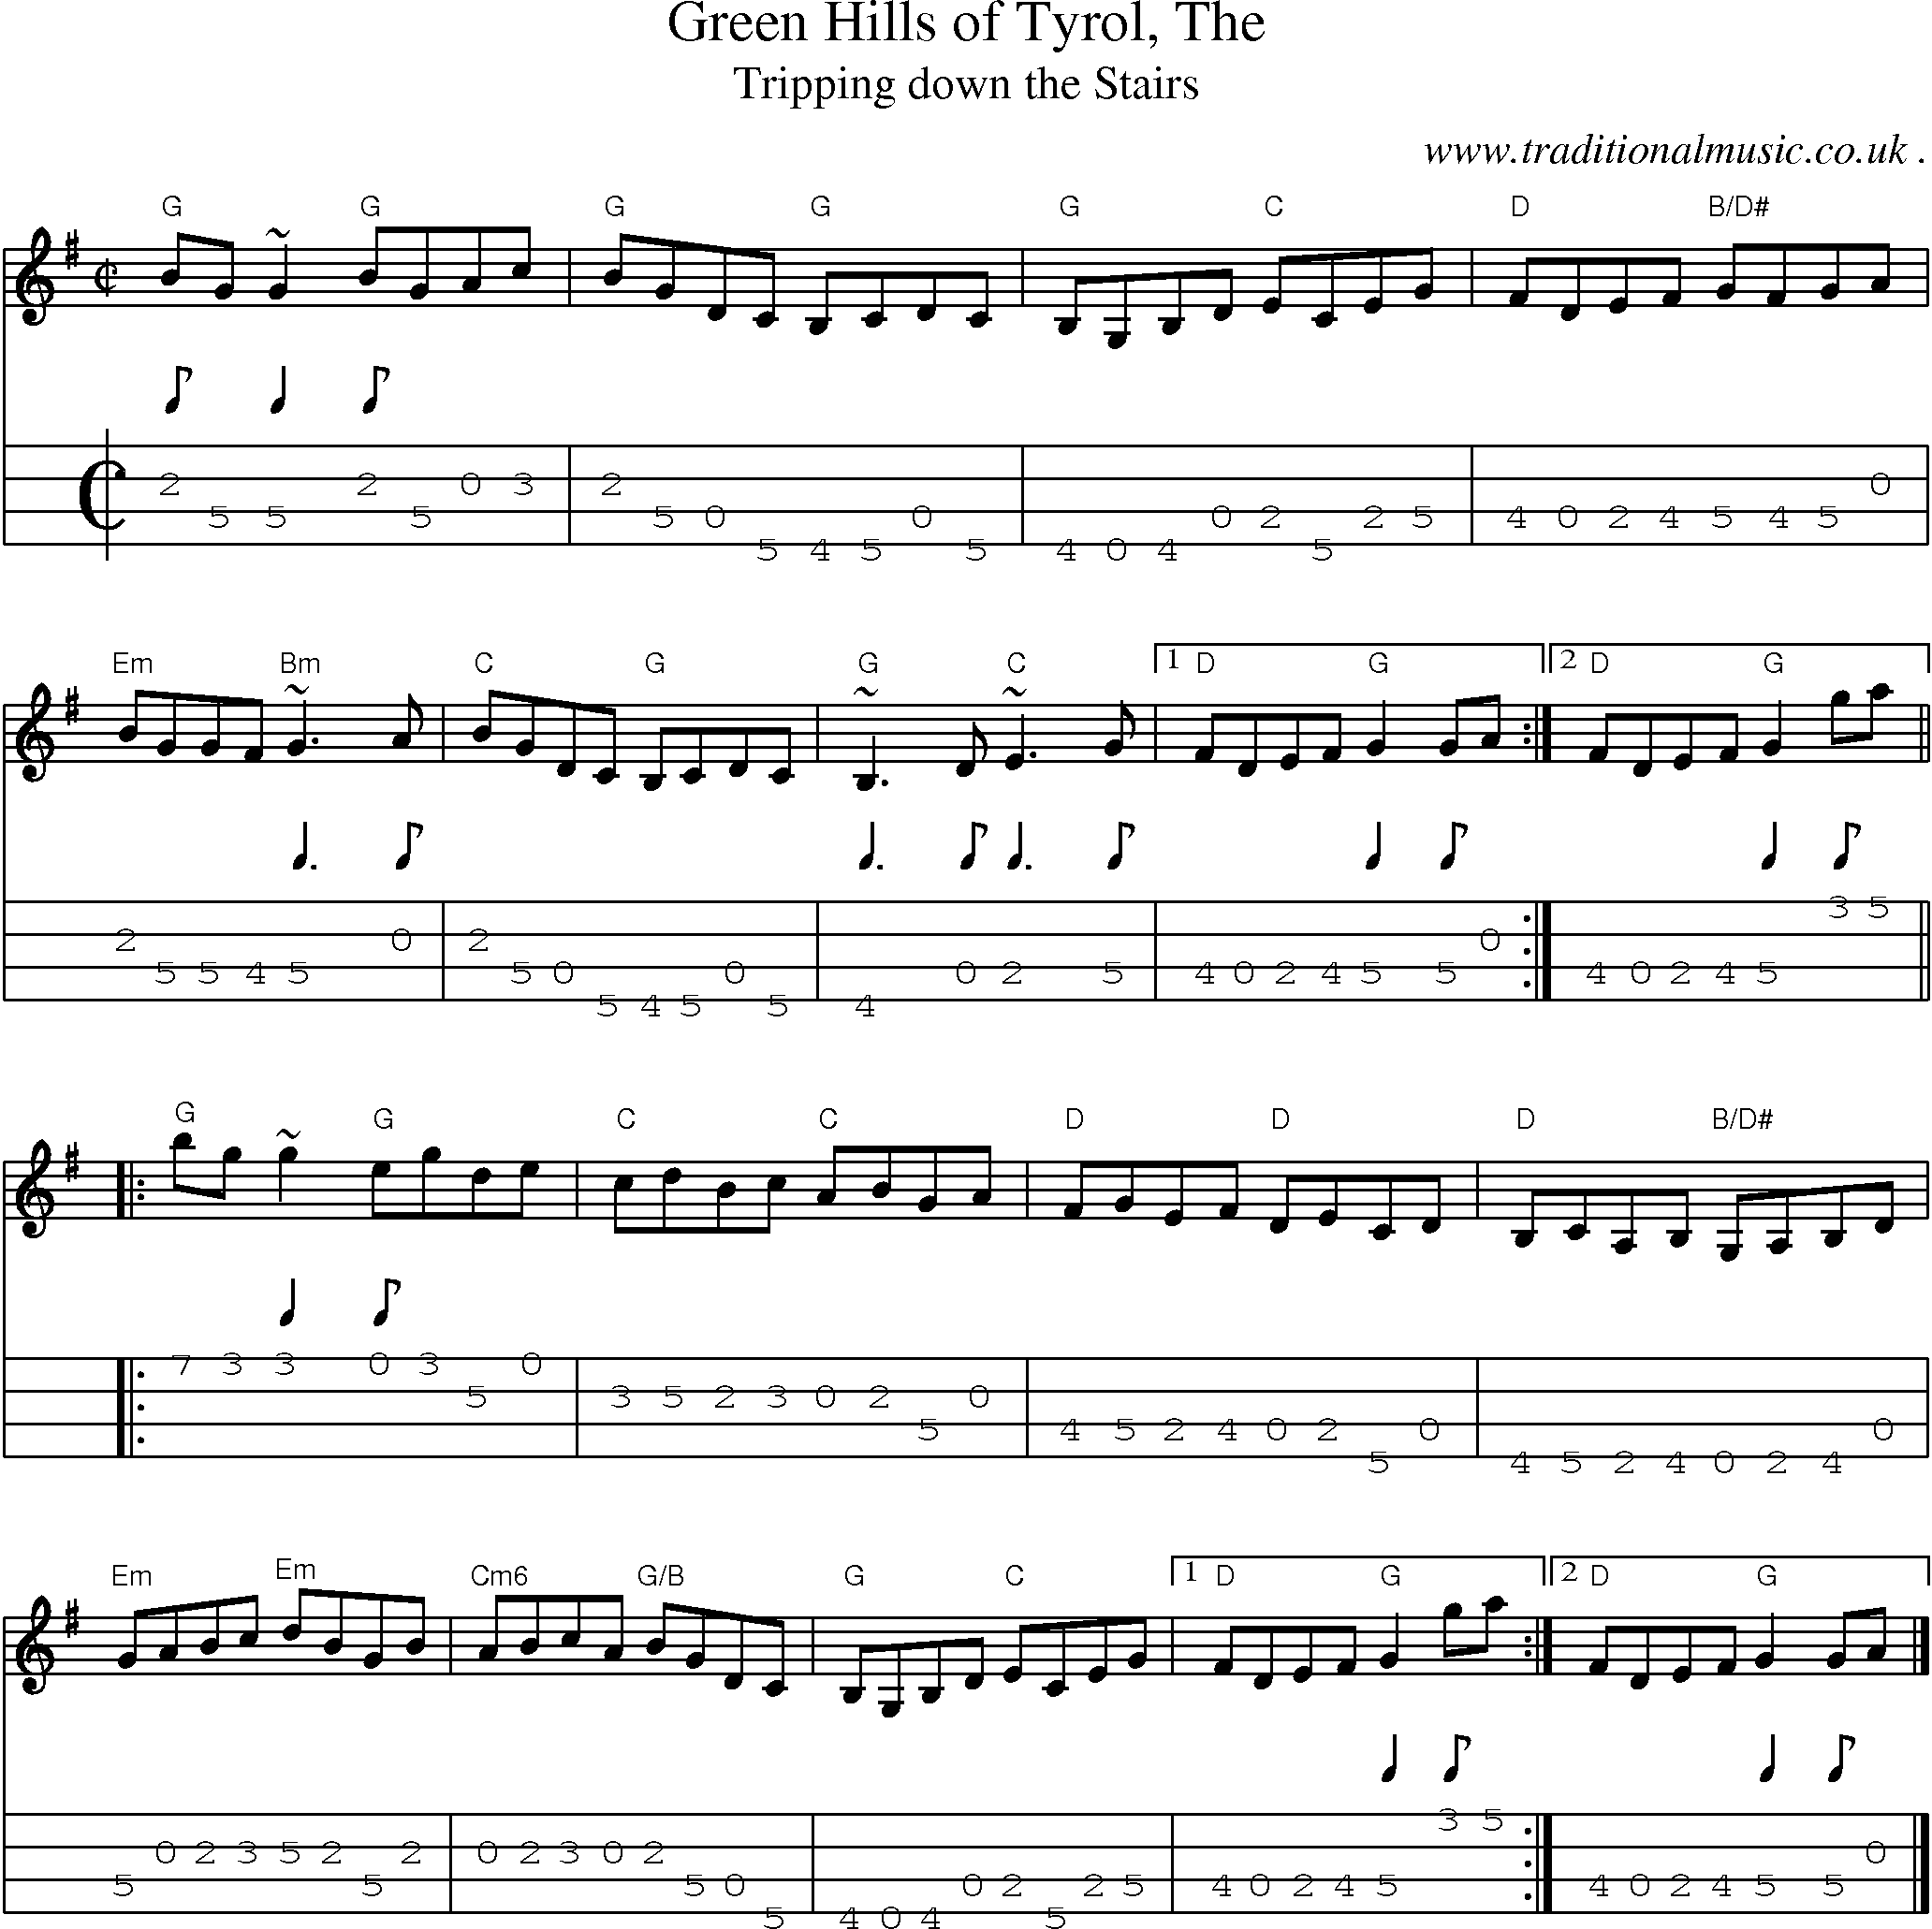 Sheet-music  score, Chords and Mandolin Tabs for Green Hills Of Tyrol The